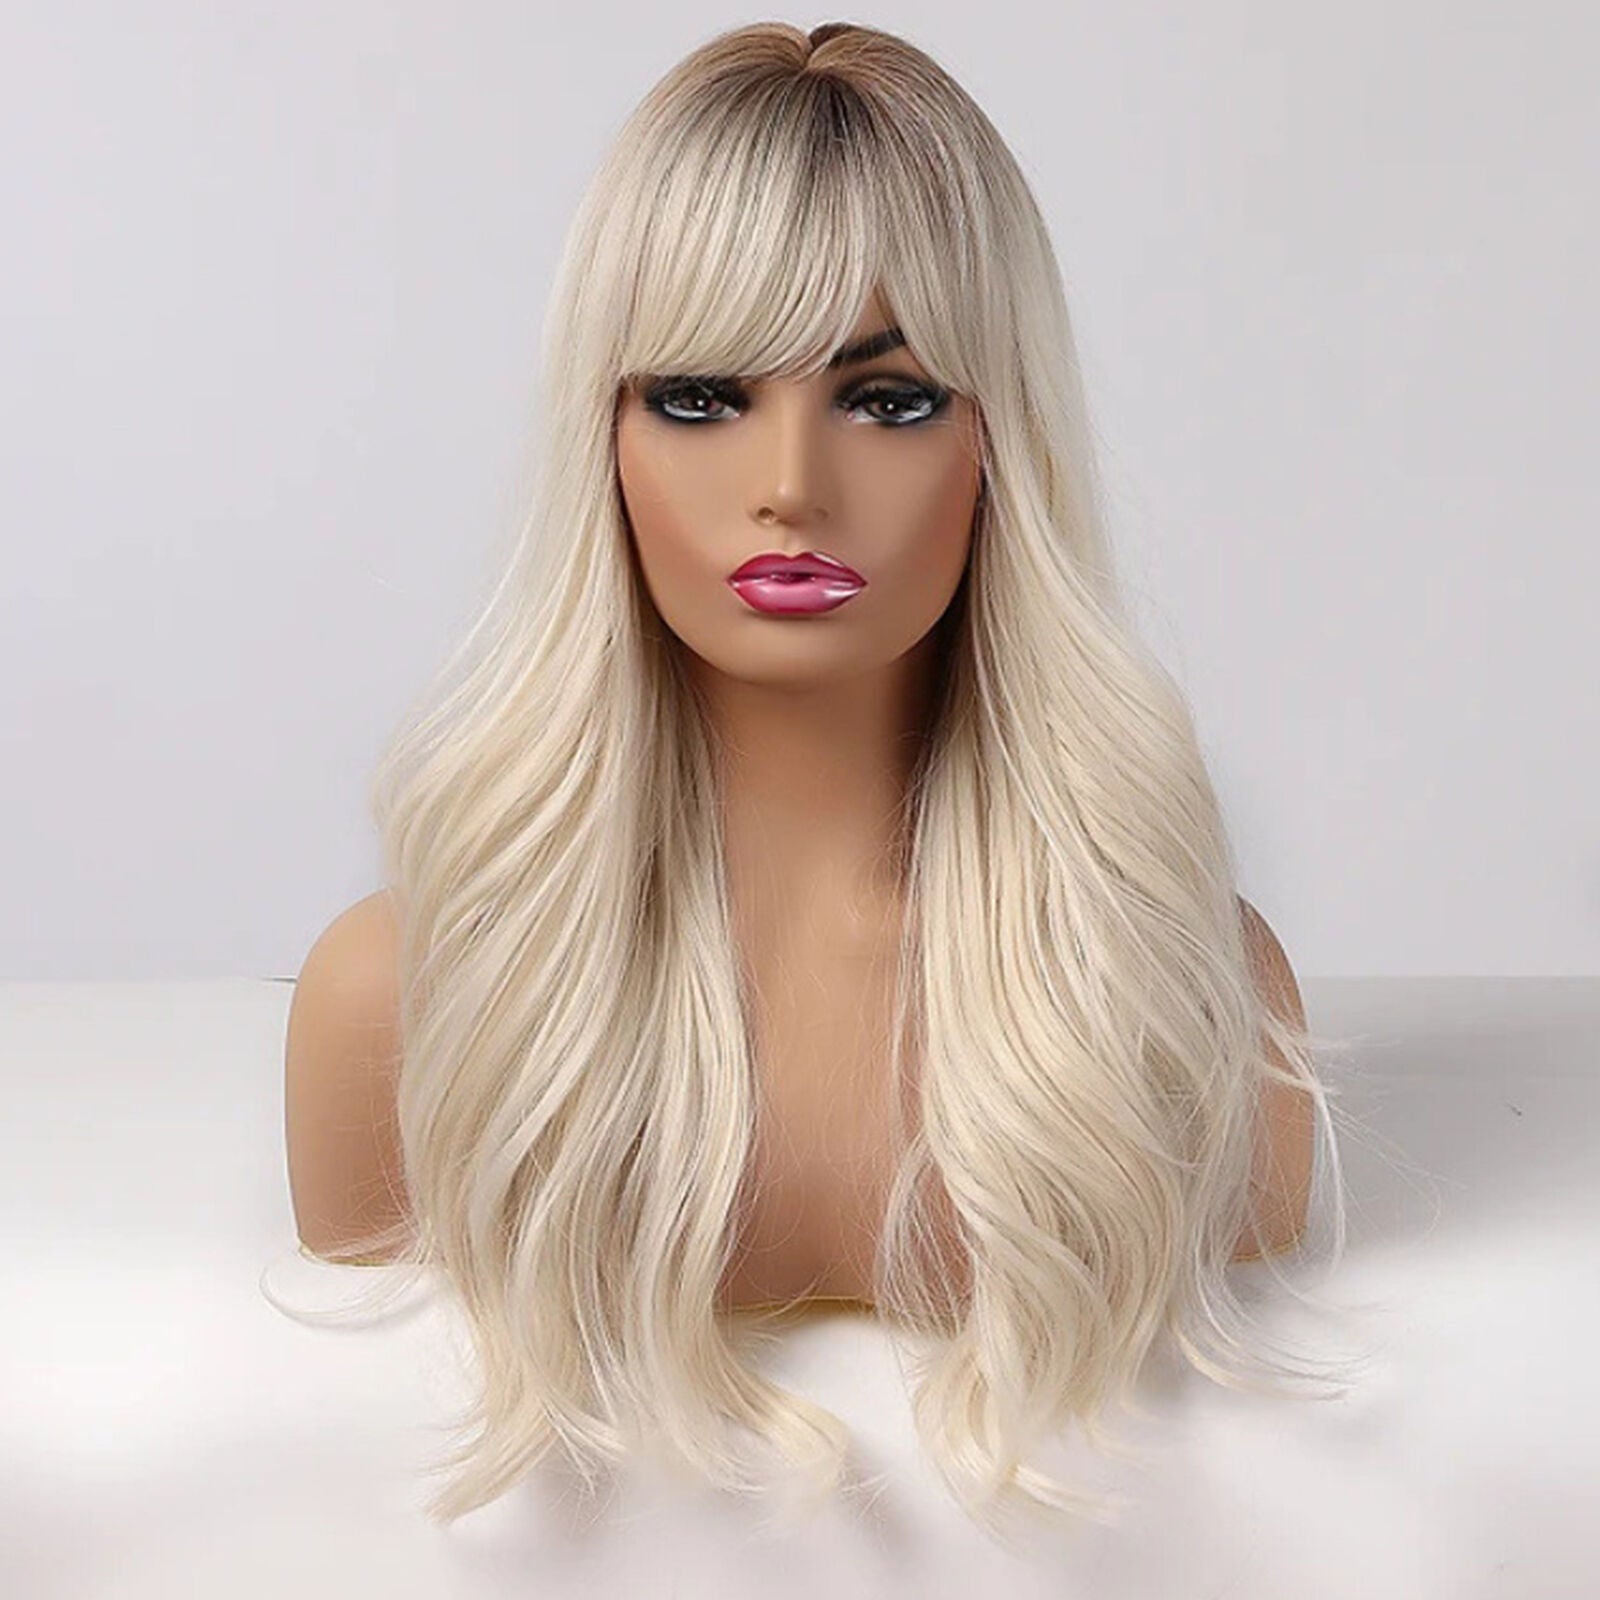 Platinum Blonde Synthetic Hair Wig for Women Long Curly Wavy Wigs with Bangs